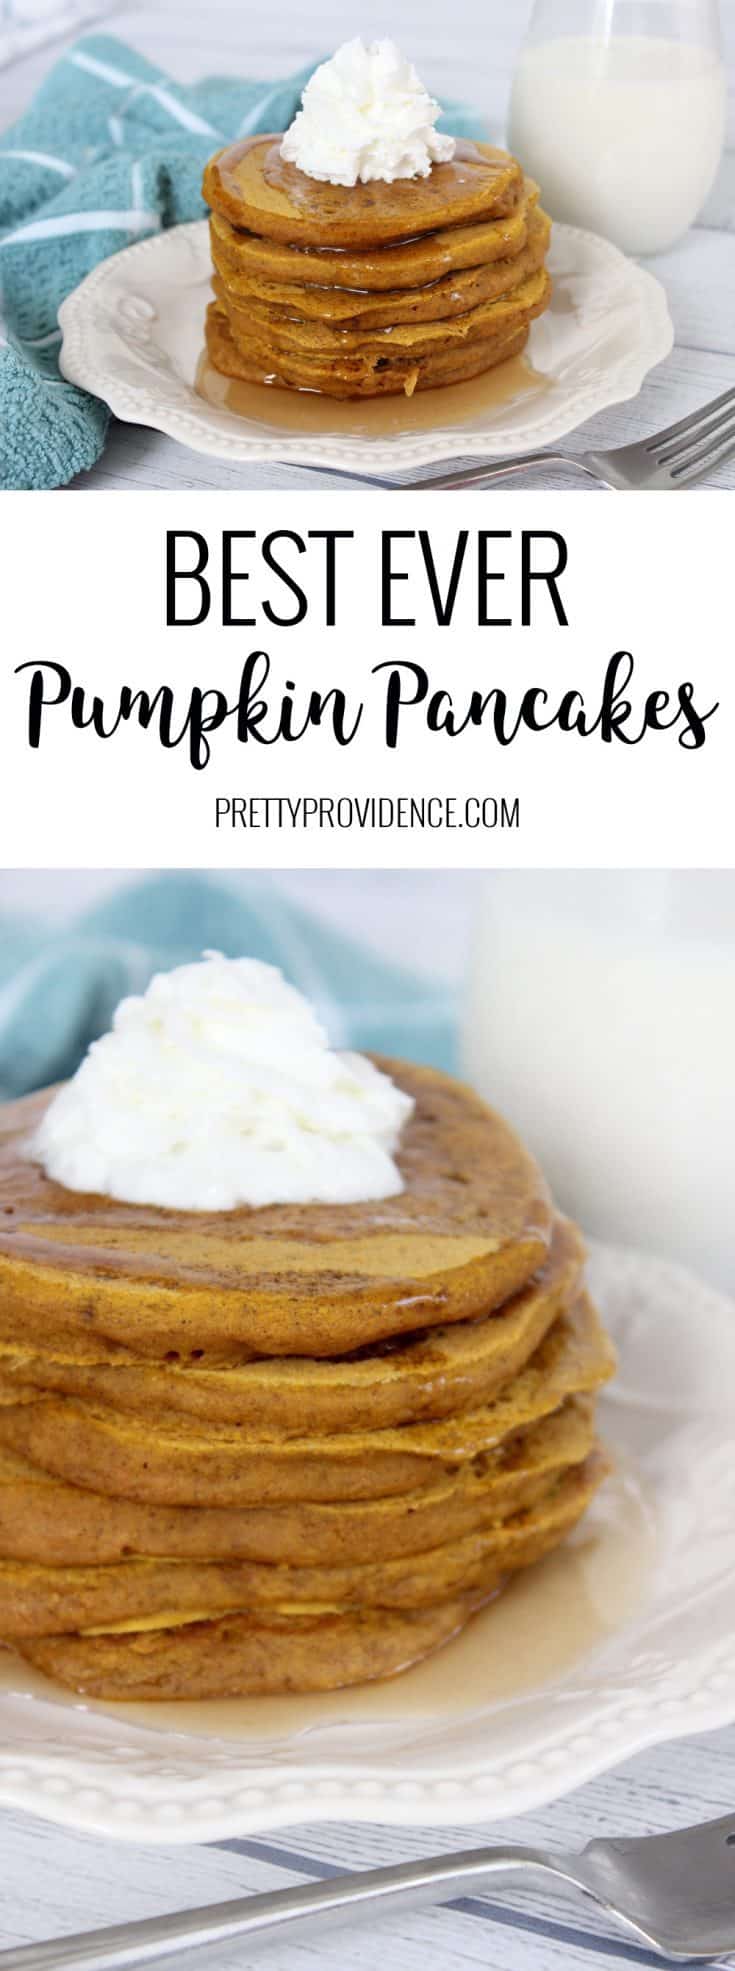 Best Ever Pumpkin Pancakes Recipe by Pretty Providence